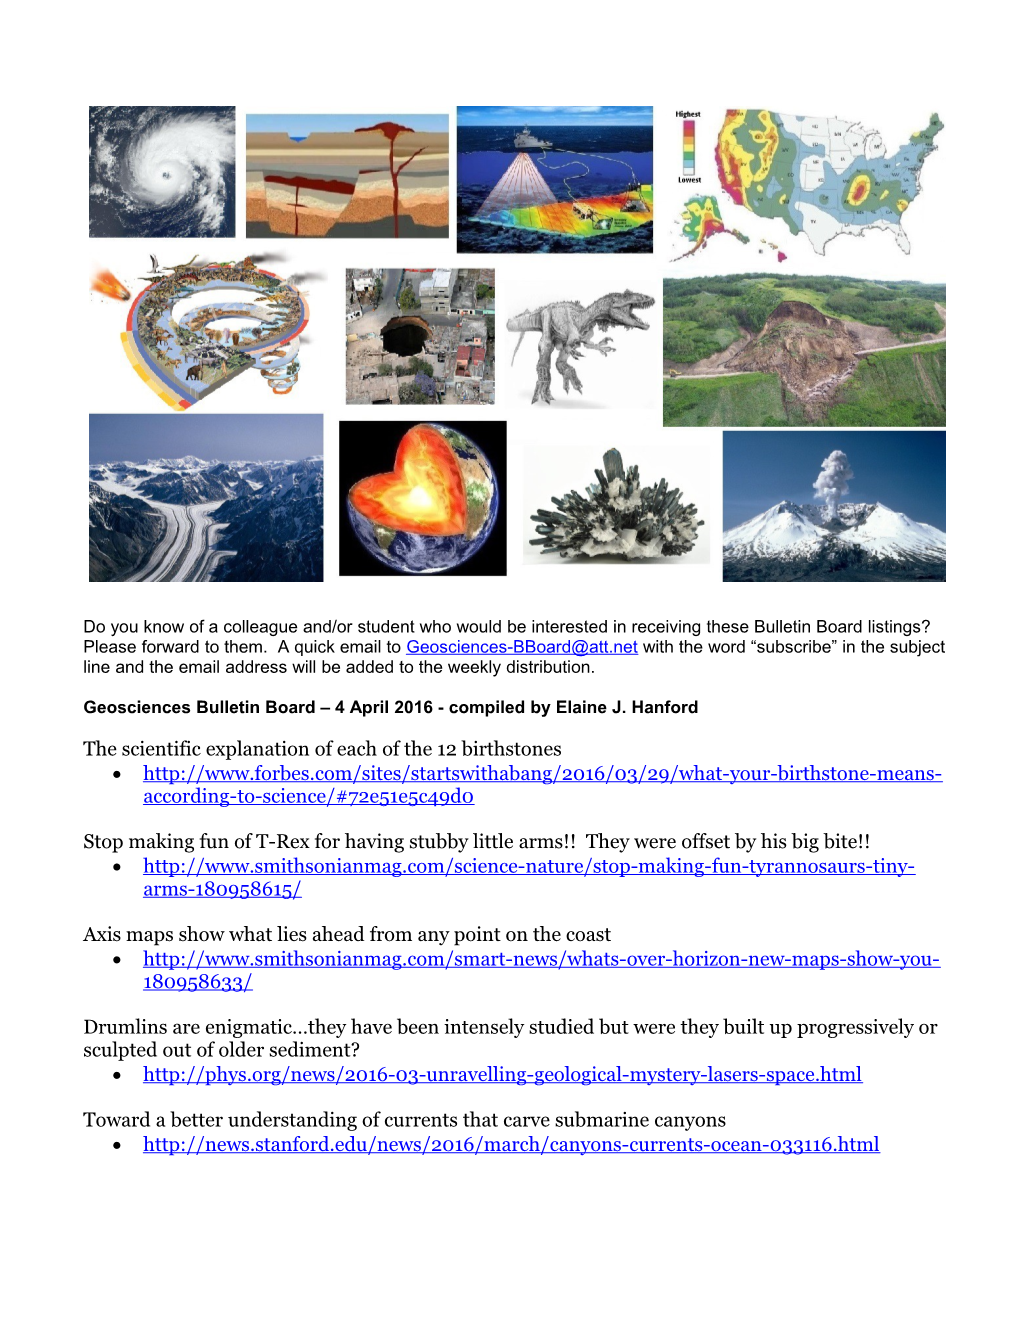 Geosciences Bulletin Board 4 April 2016- Compiled by Elaine J. Hanford